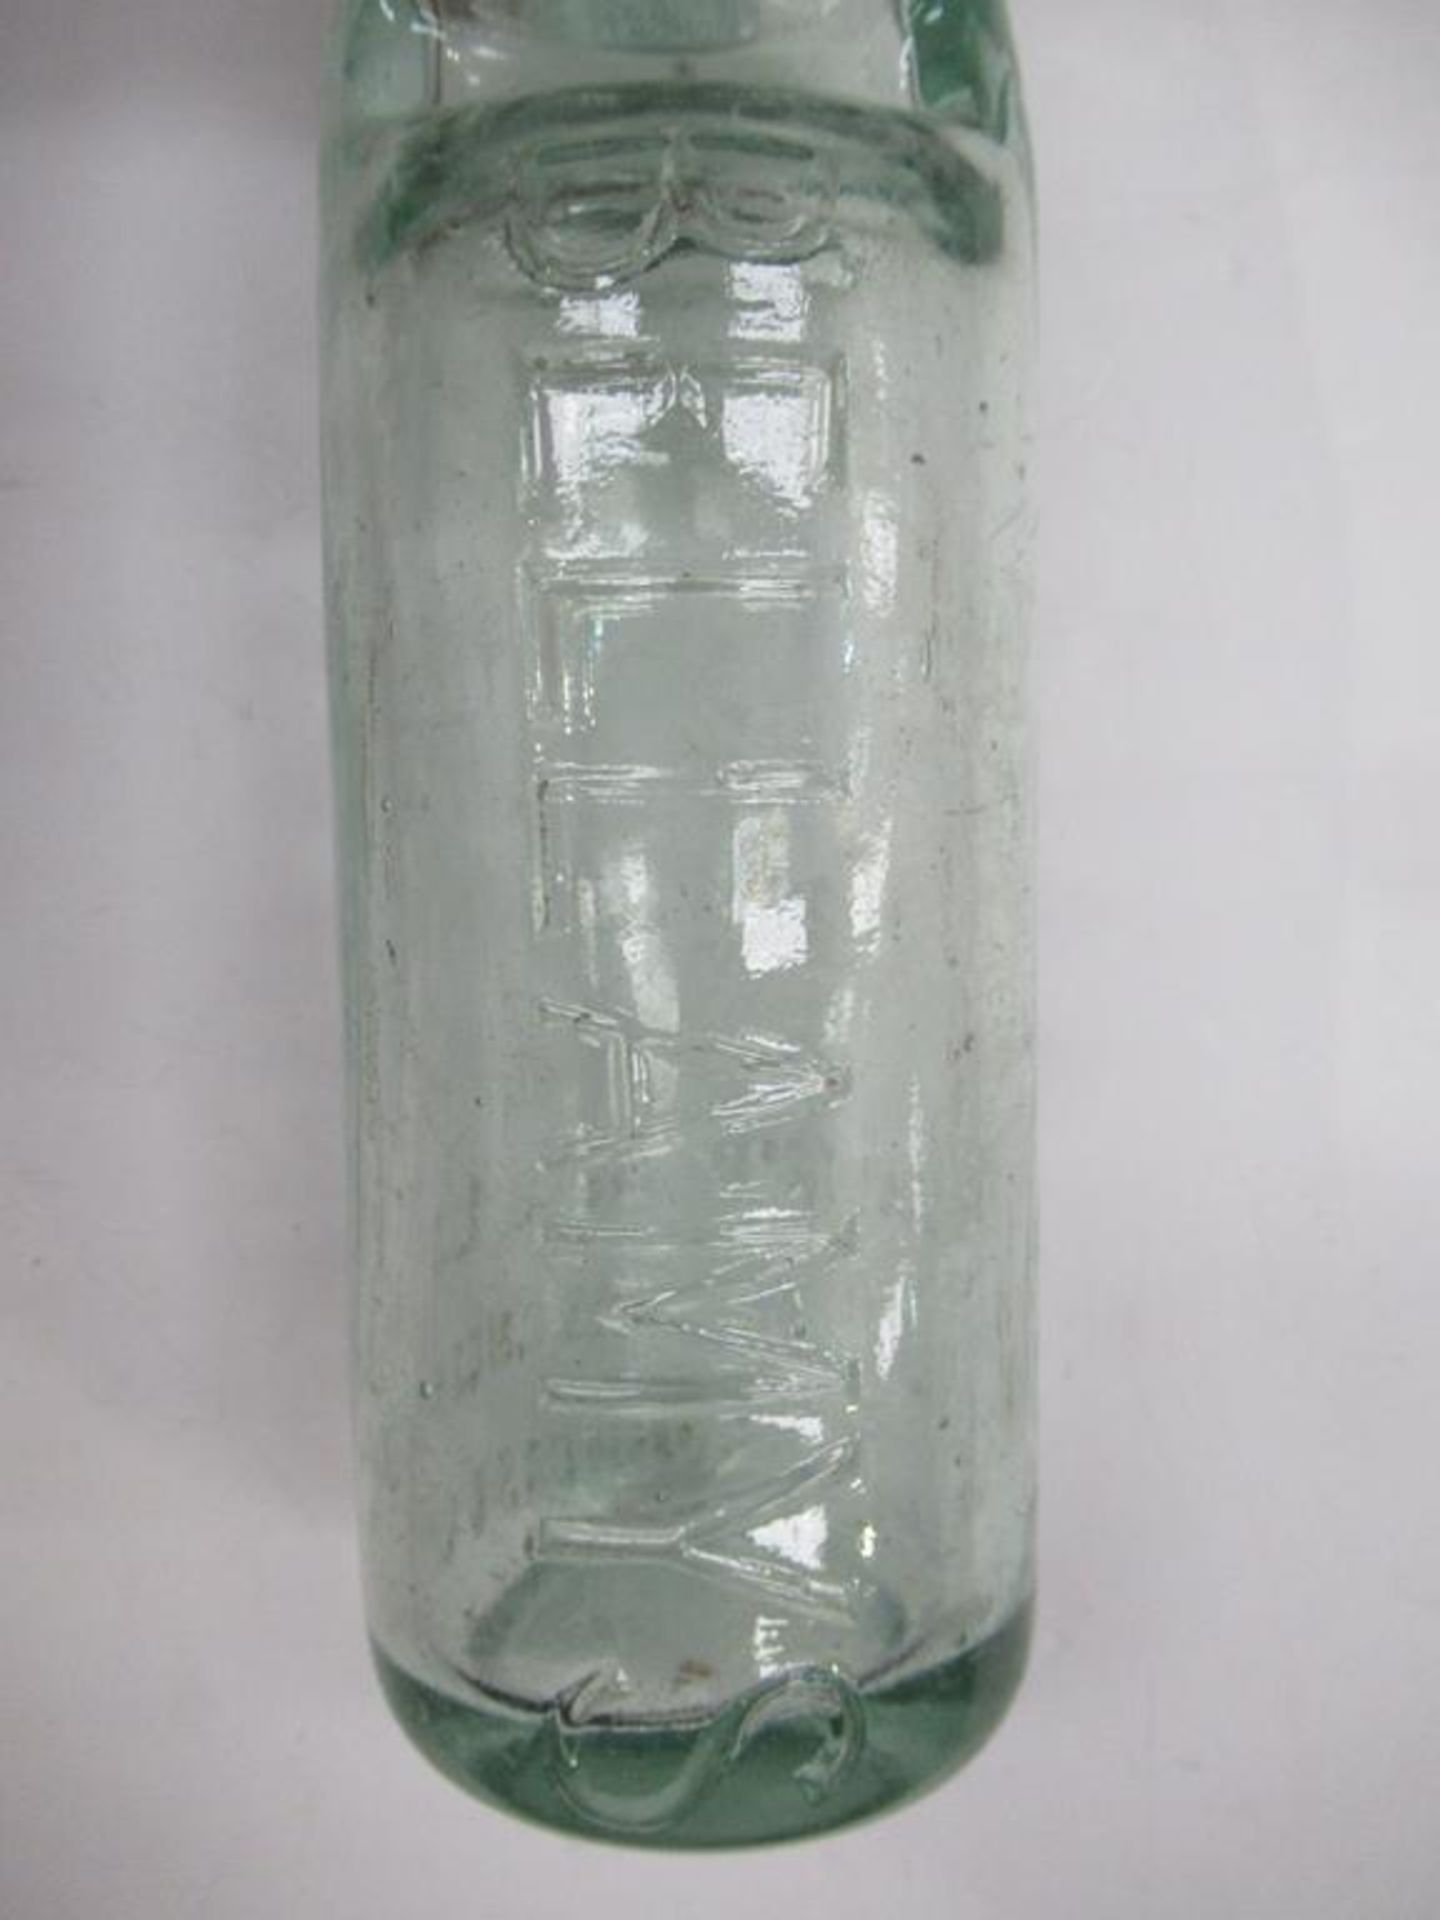 8x Grimsby (2x New Clee, 3x Louth, 1x Skegness, Louth & Horncastle) Bellamy Bros codd bottles - Image 11 of 25